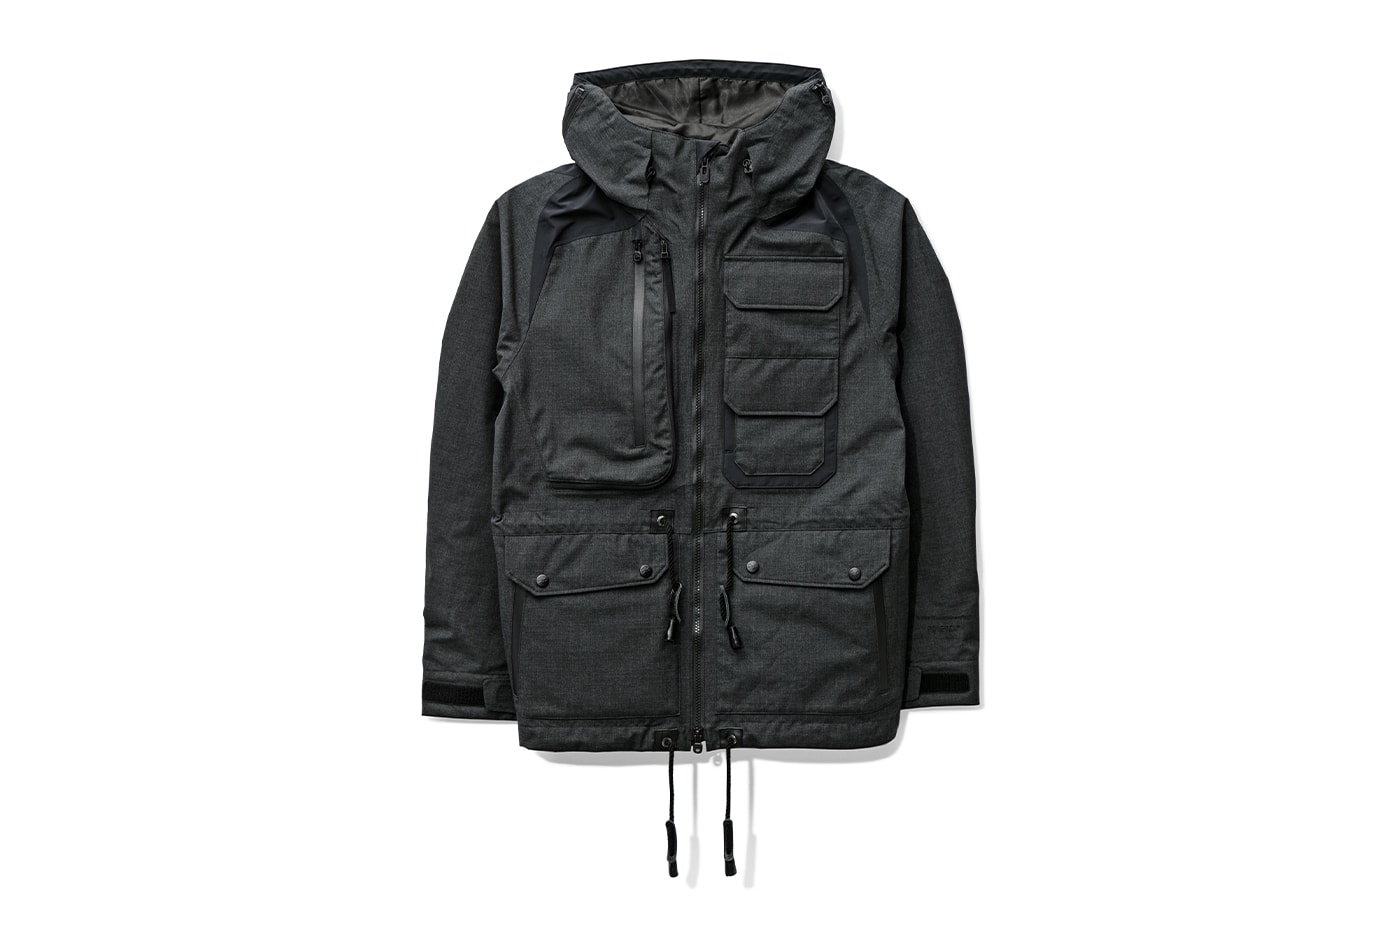 HBX Archives Week 120 CLOT White Mountaineering Release